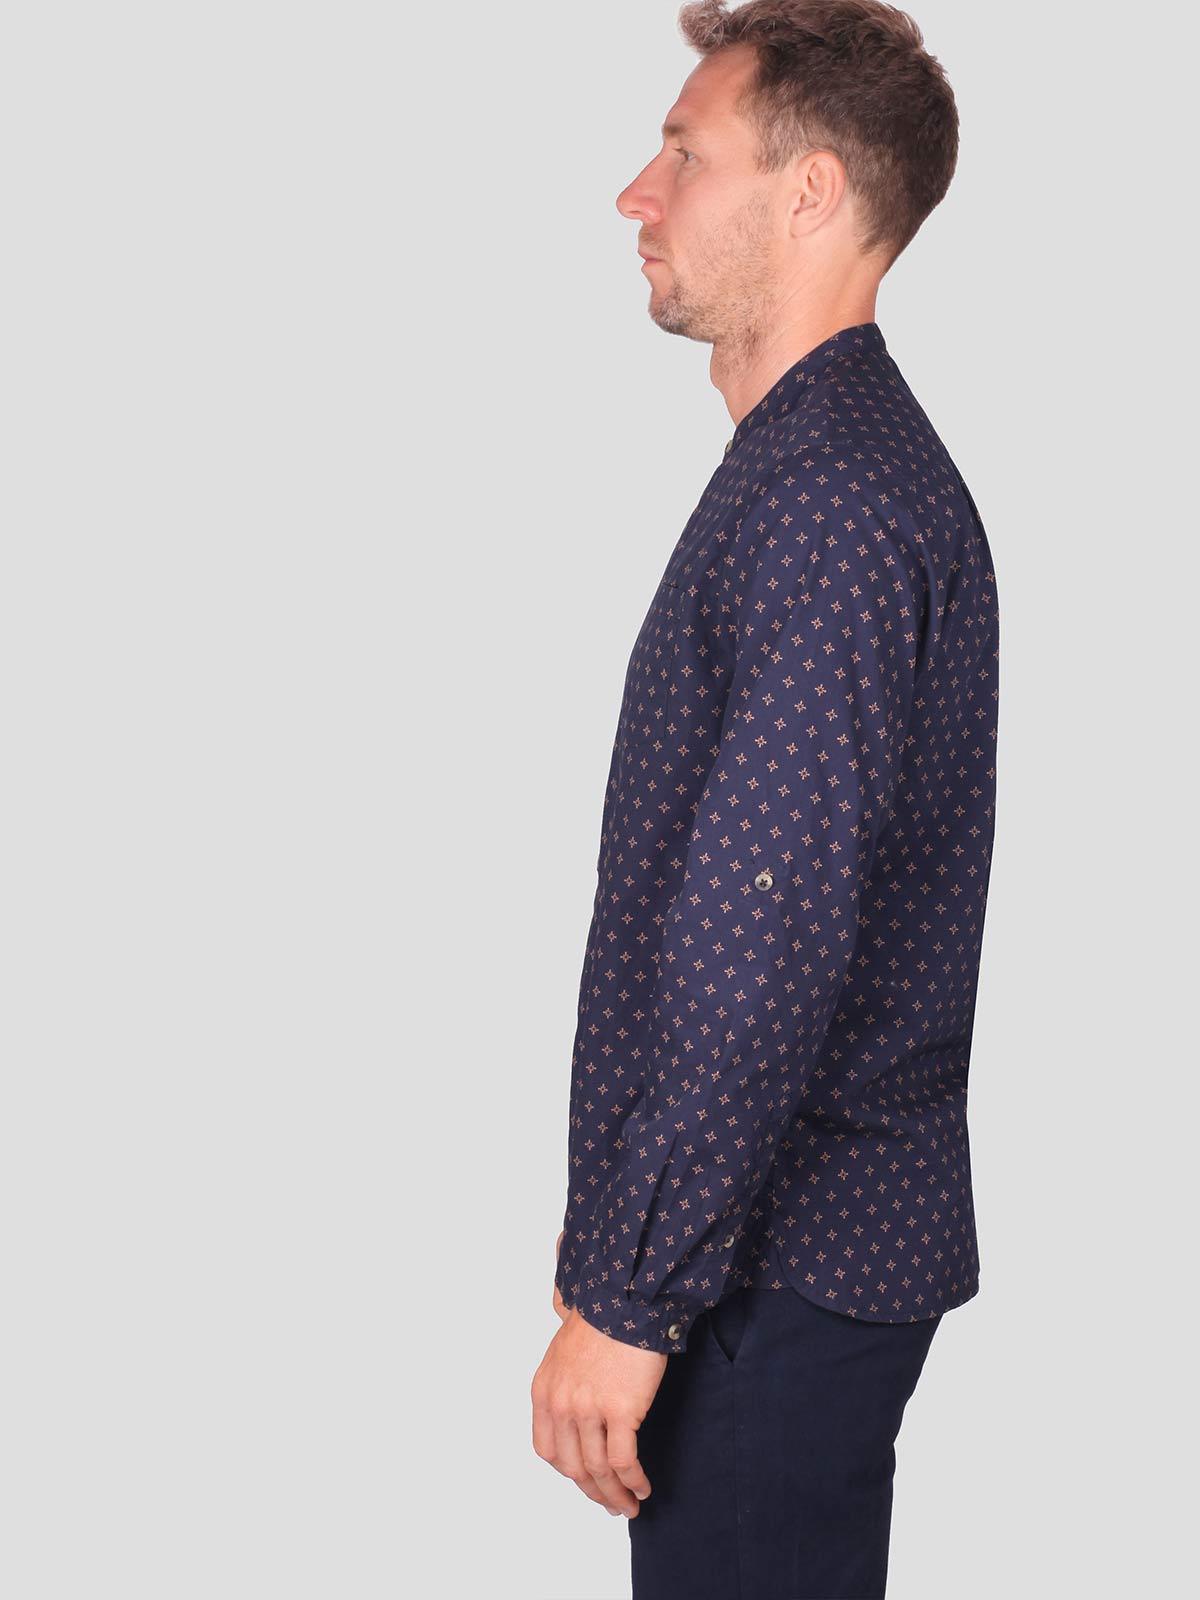 Chaucer Fairtrade Organic Cotton Long Sleeve Printed Shirt - Thought Clothing UK